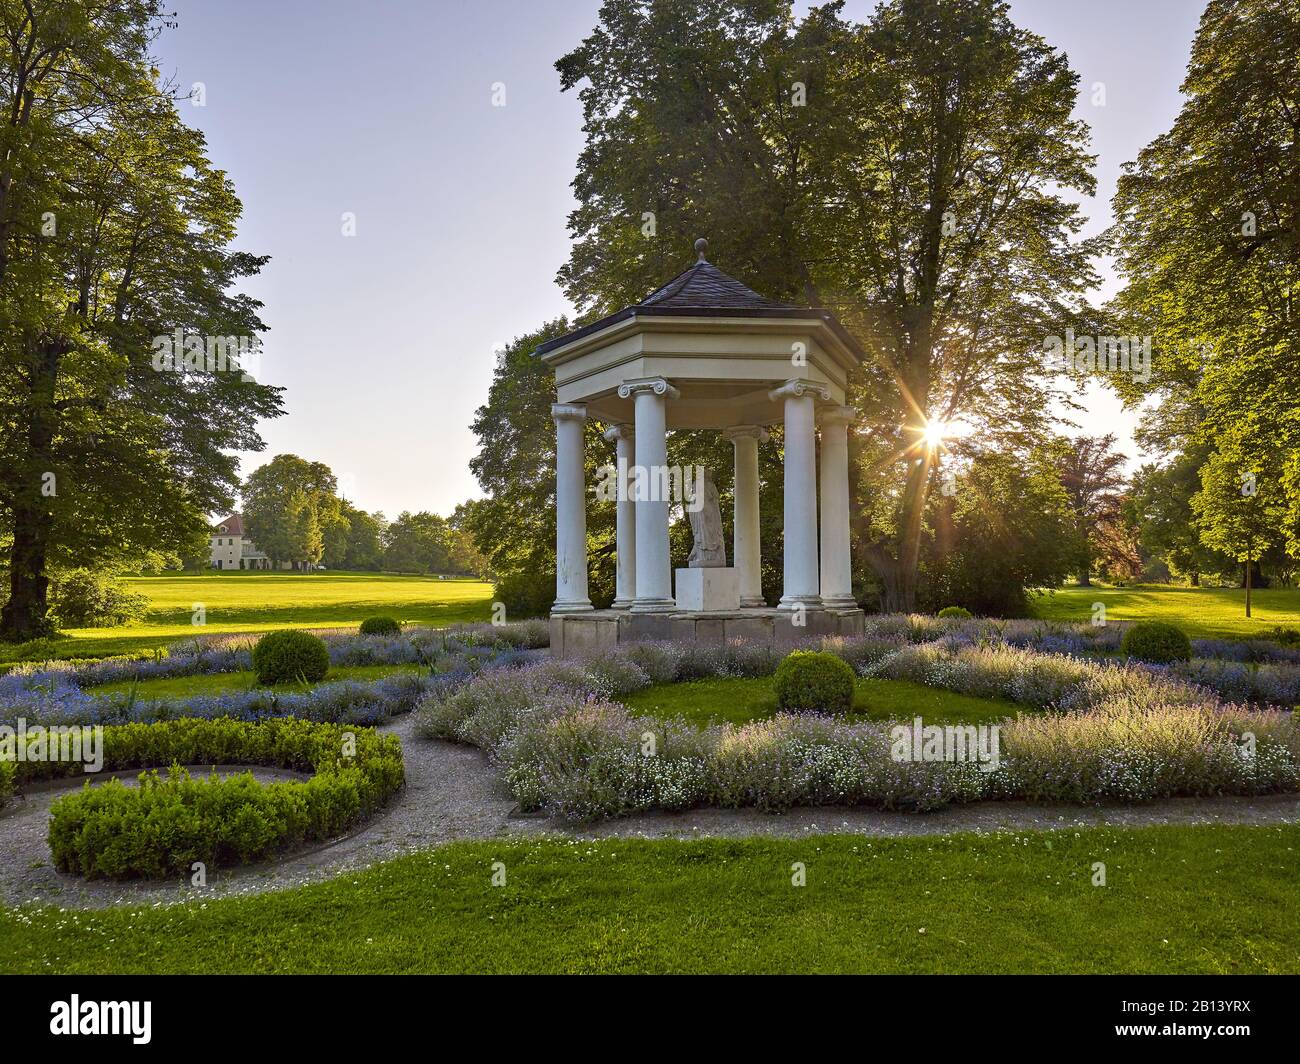 Calligraphic Temple of Calliope in Tiefurter Park,Thuringia,Germany Stock Photo